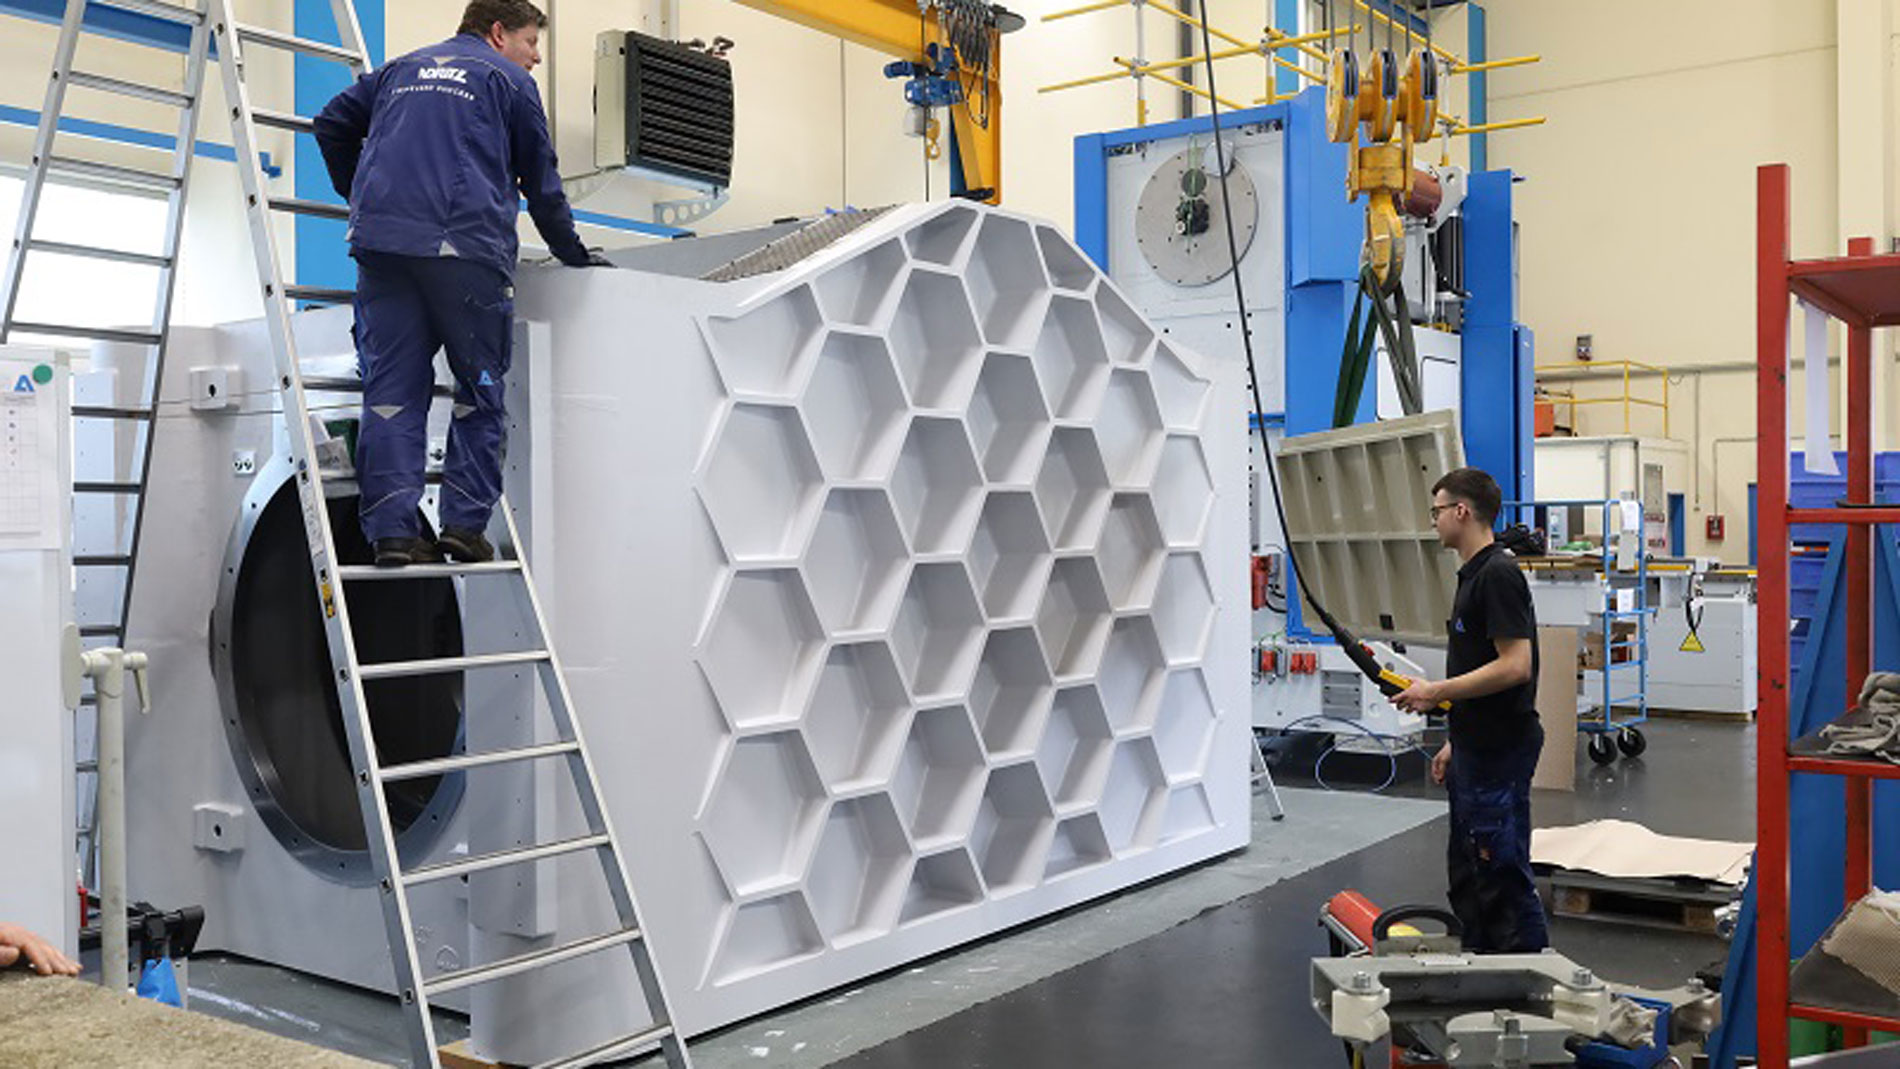 The press’s top section, which features a honeycomb structure that reduces vibration and makes the cast-iron colossus a bit less heavy. Image: Thomas Masuch